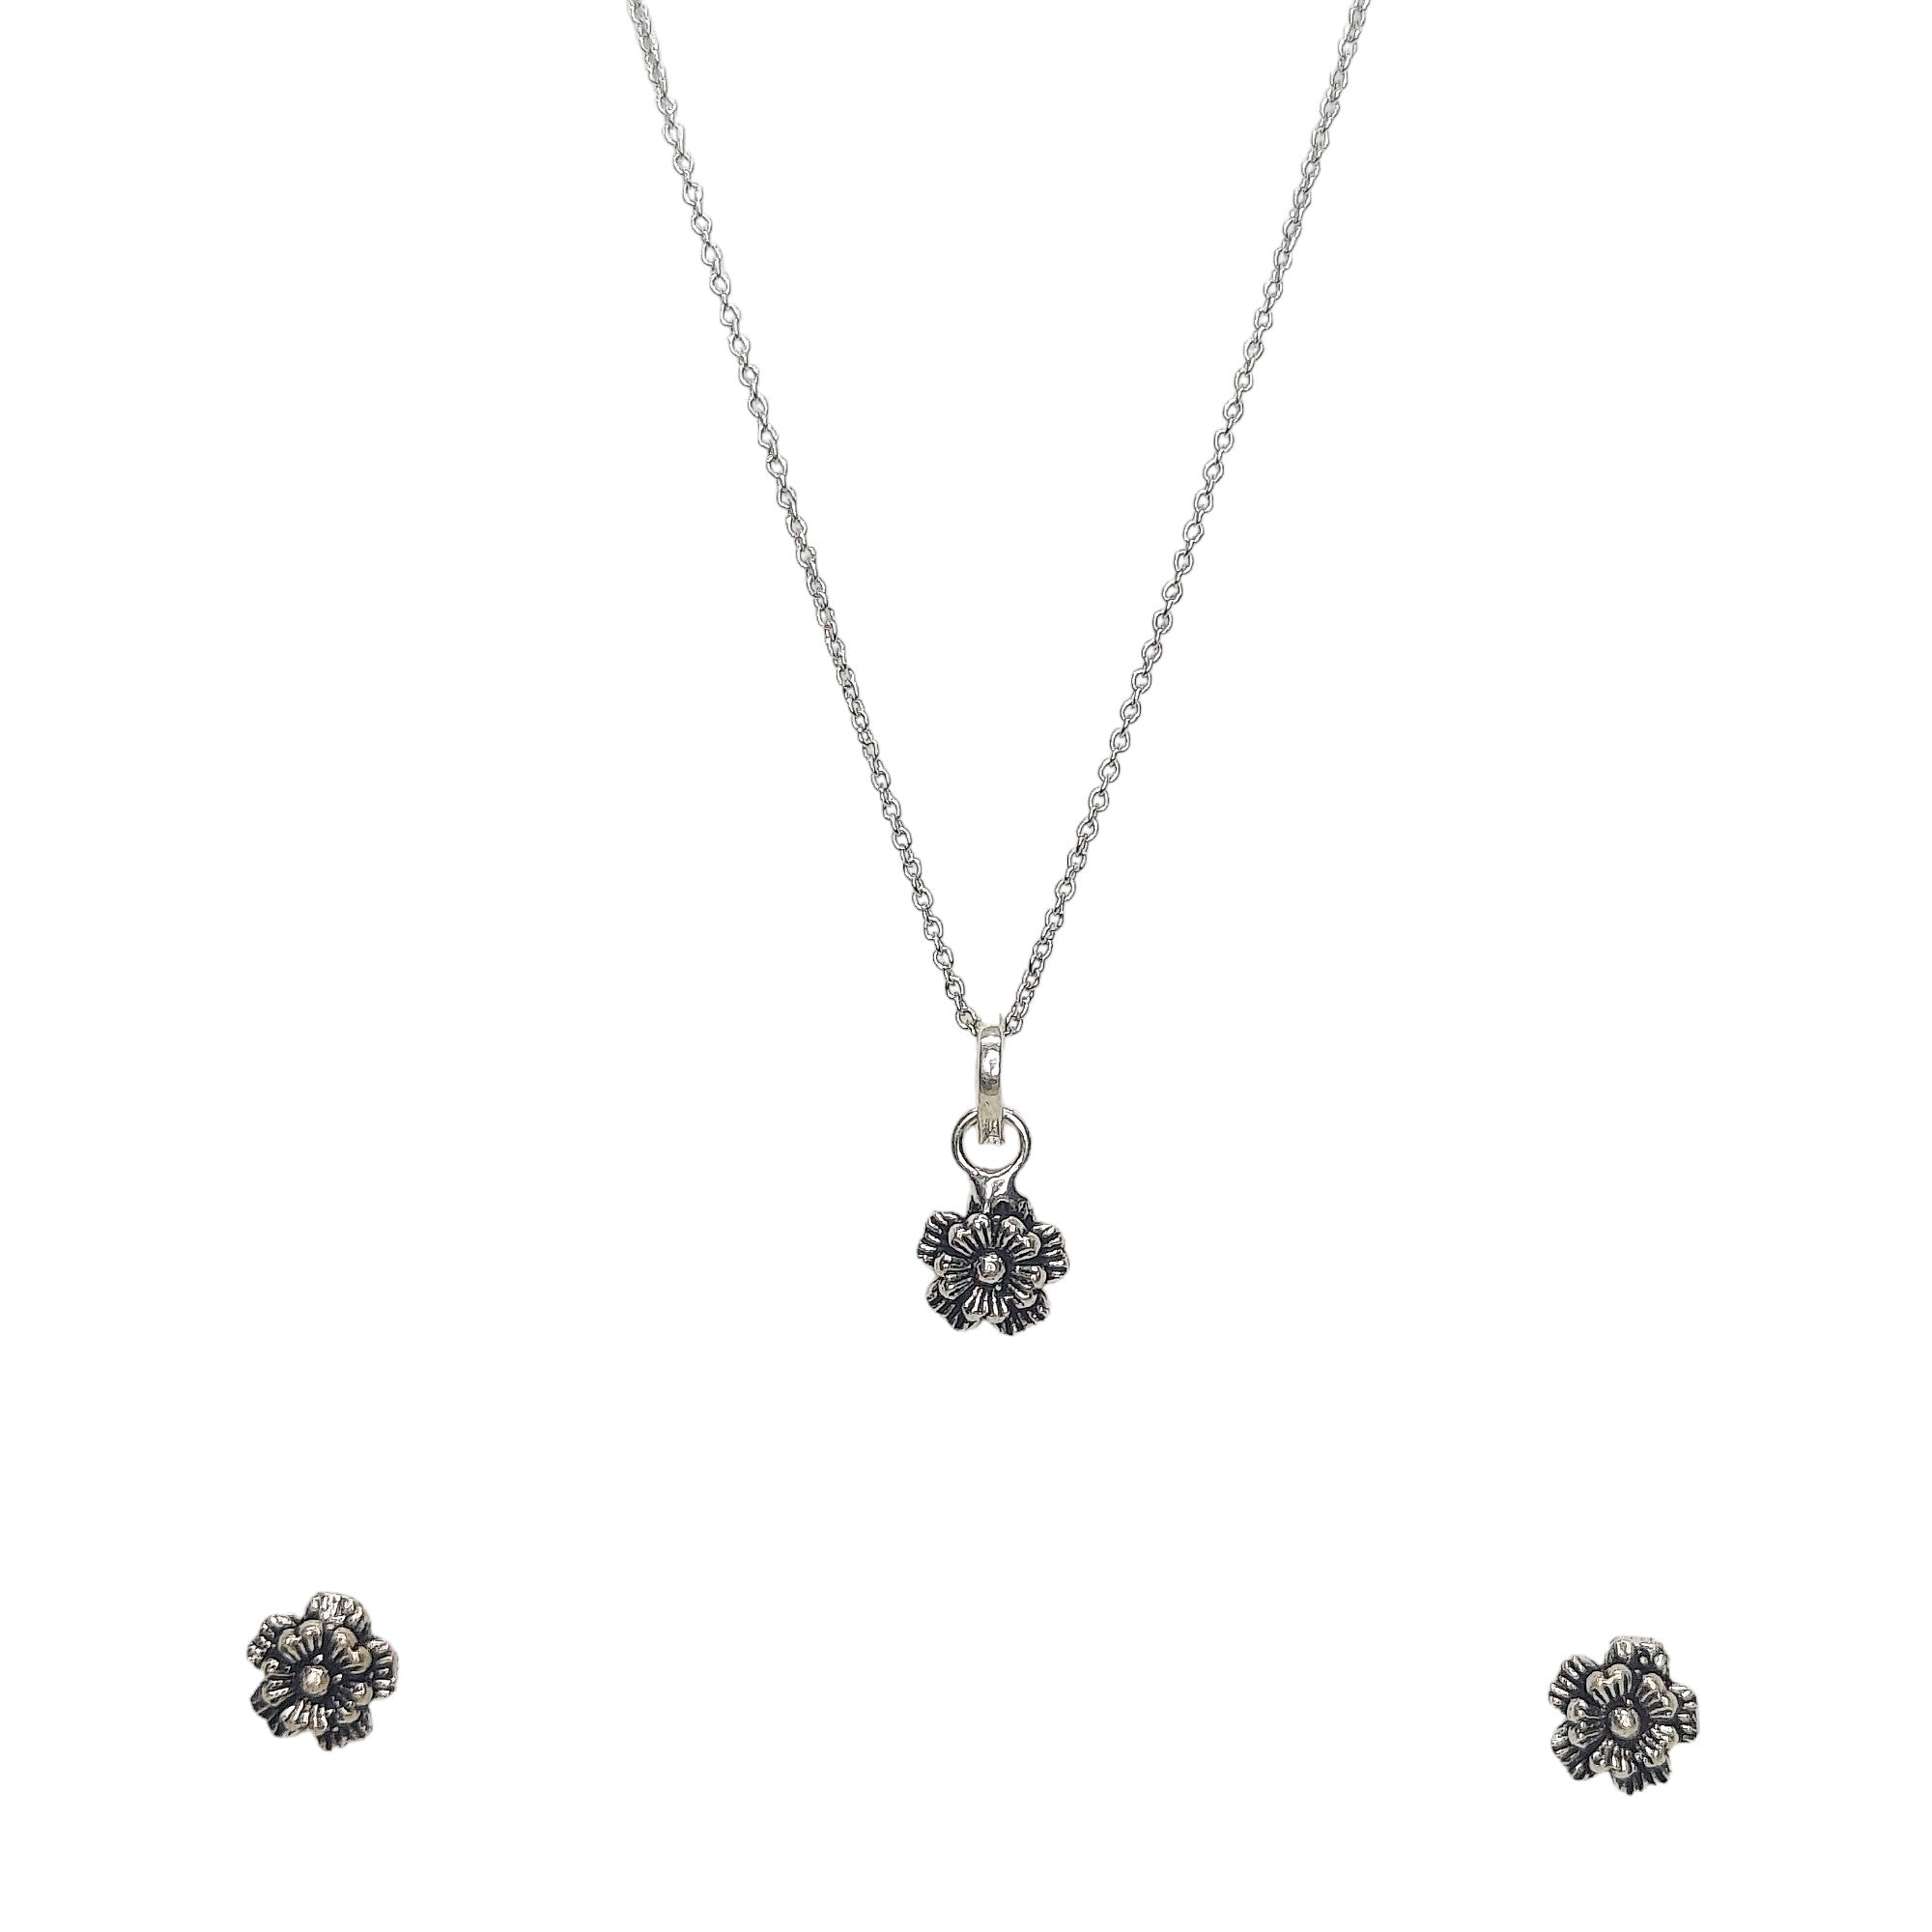 Five Petals Oxidized Sterling Silver Pendent Set With Chain For Women - Rivansh